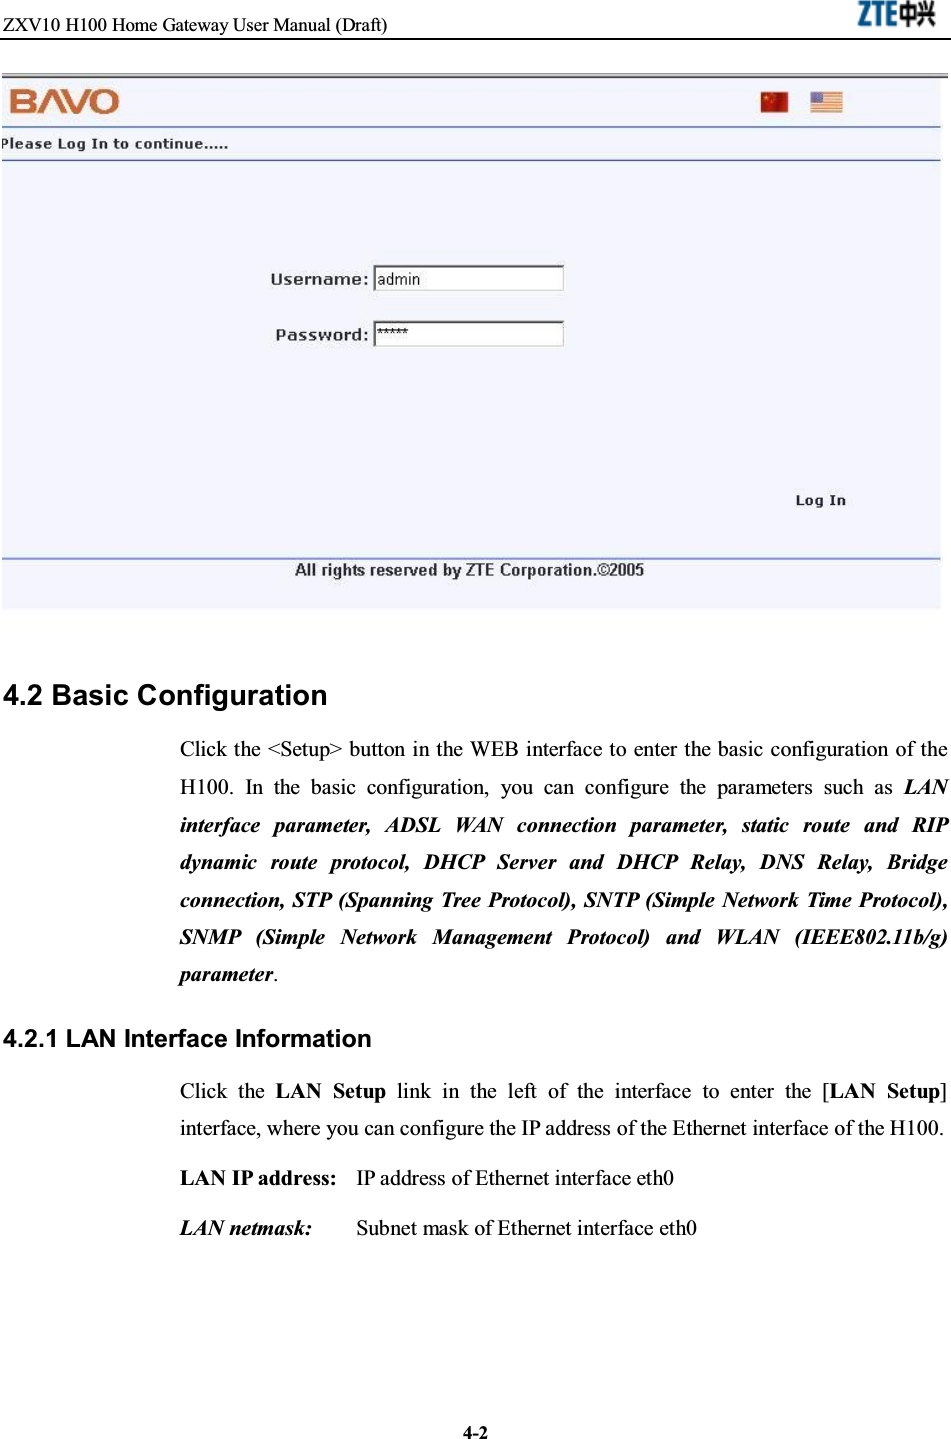 ZXV10 H100 Home Gateway User Manual (Draft)4-24.2 Basic ConfigurationClick the &lt;Setup&gt; button in the WEB interface to enter the basic configuration of theH100. In the basic configuration, you can configure the parameters such as LANinterface parameter, ADSL WAN connection parameter, static route and RIPdynamic route protocol, DHCP Server and DHCP Relay, DNS Relay, Bridgeconnection, STP (Spanning Tree Protocol), SNTP (Simple Network Time Protocol),SNMP (Simple Network Management Protocol) and WLAN (IEEE802.11b/g)parameter.4.2.1 LAN Interface InformationClick the LAN Setup link in the left of the interface to enter the [LAN Setup]interface, where you can configure the IP address of the Ethernet interface of the H100.LAN IP address: IP address of Ethernet interface eth0LAN netmask: Subnet mask of Ethernet interface eth0